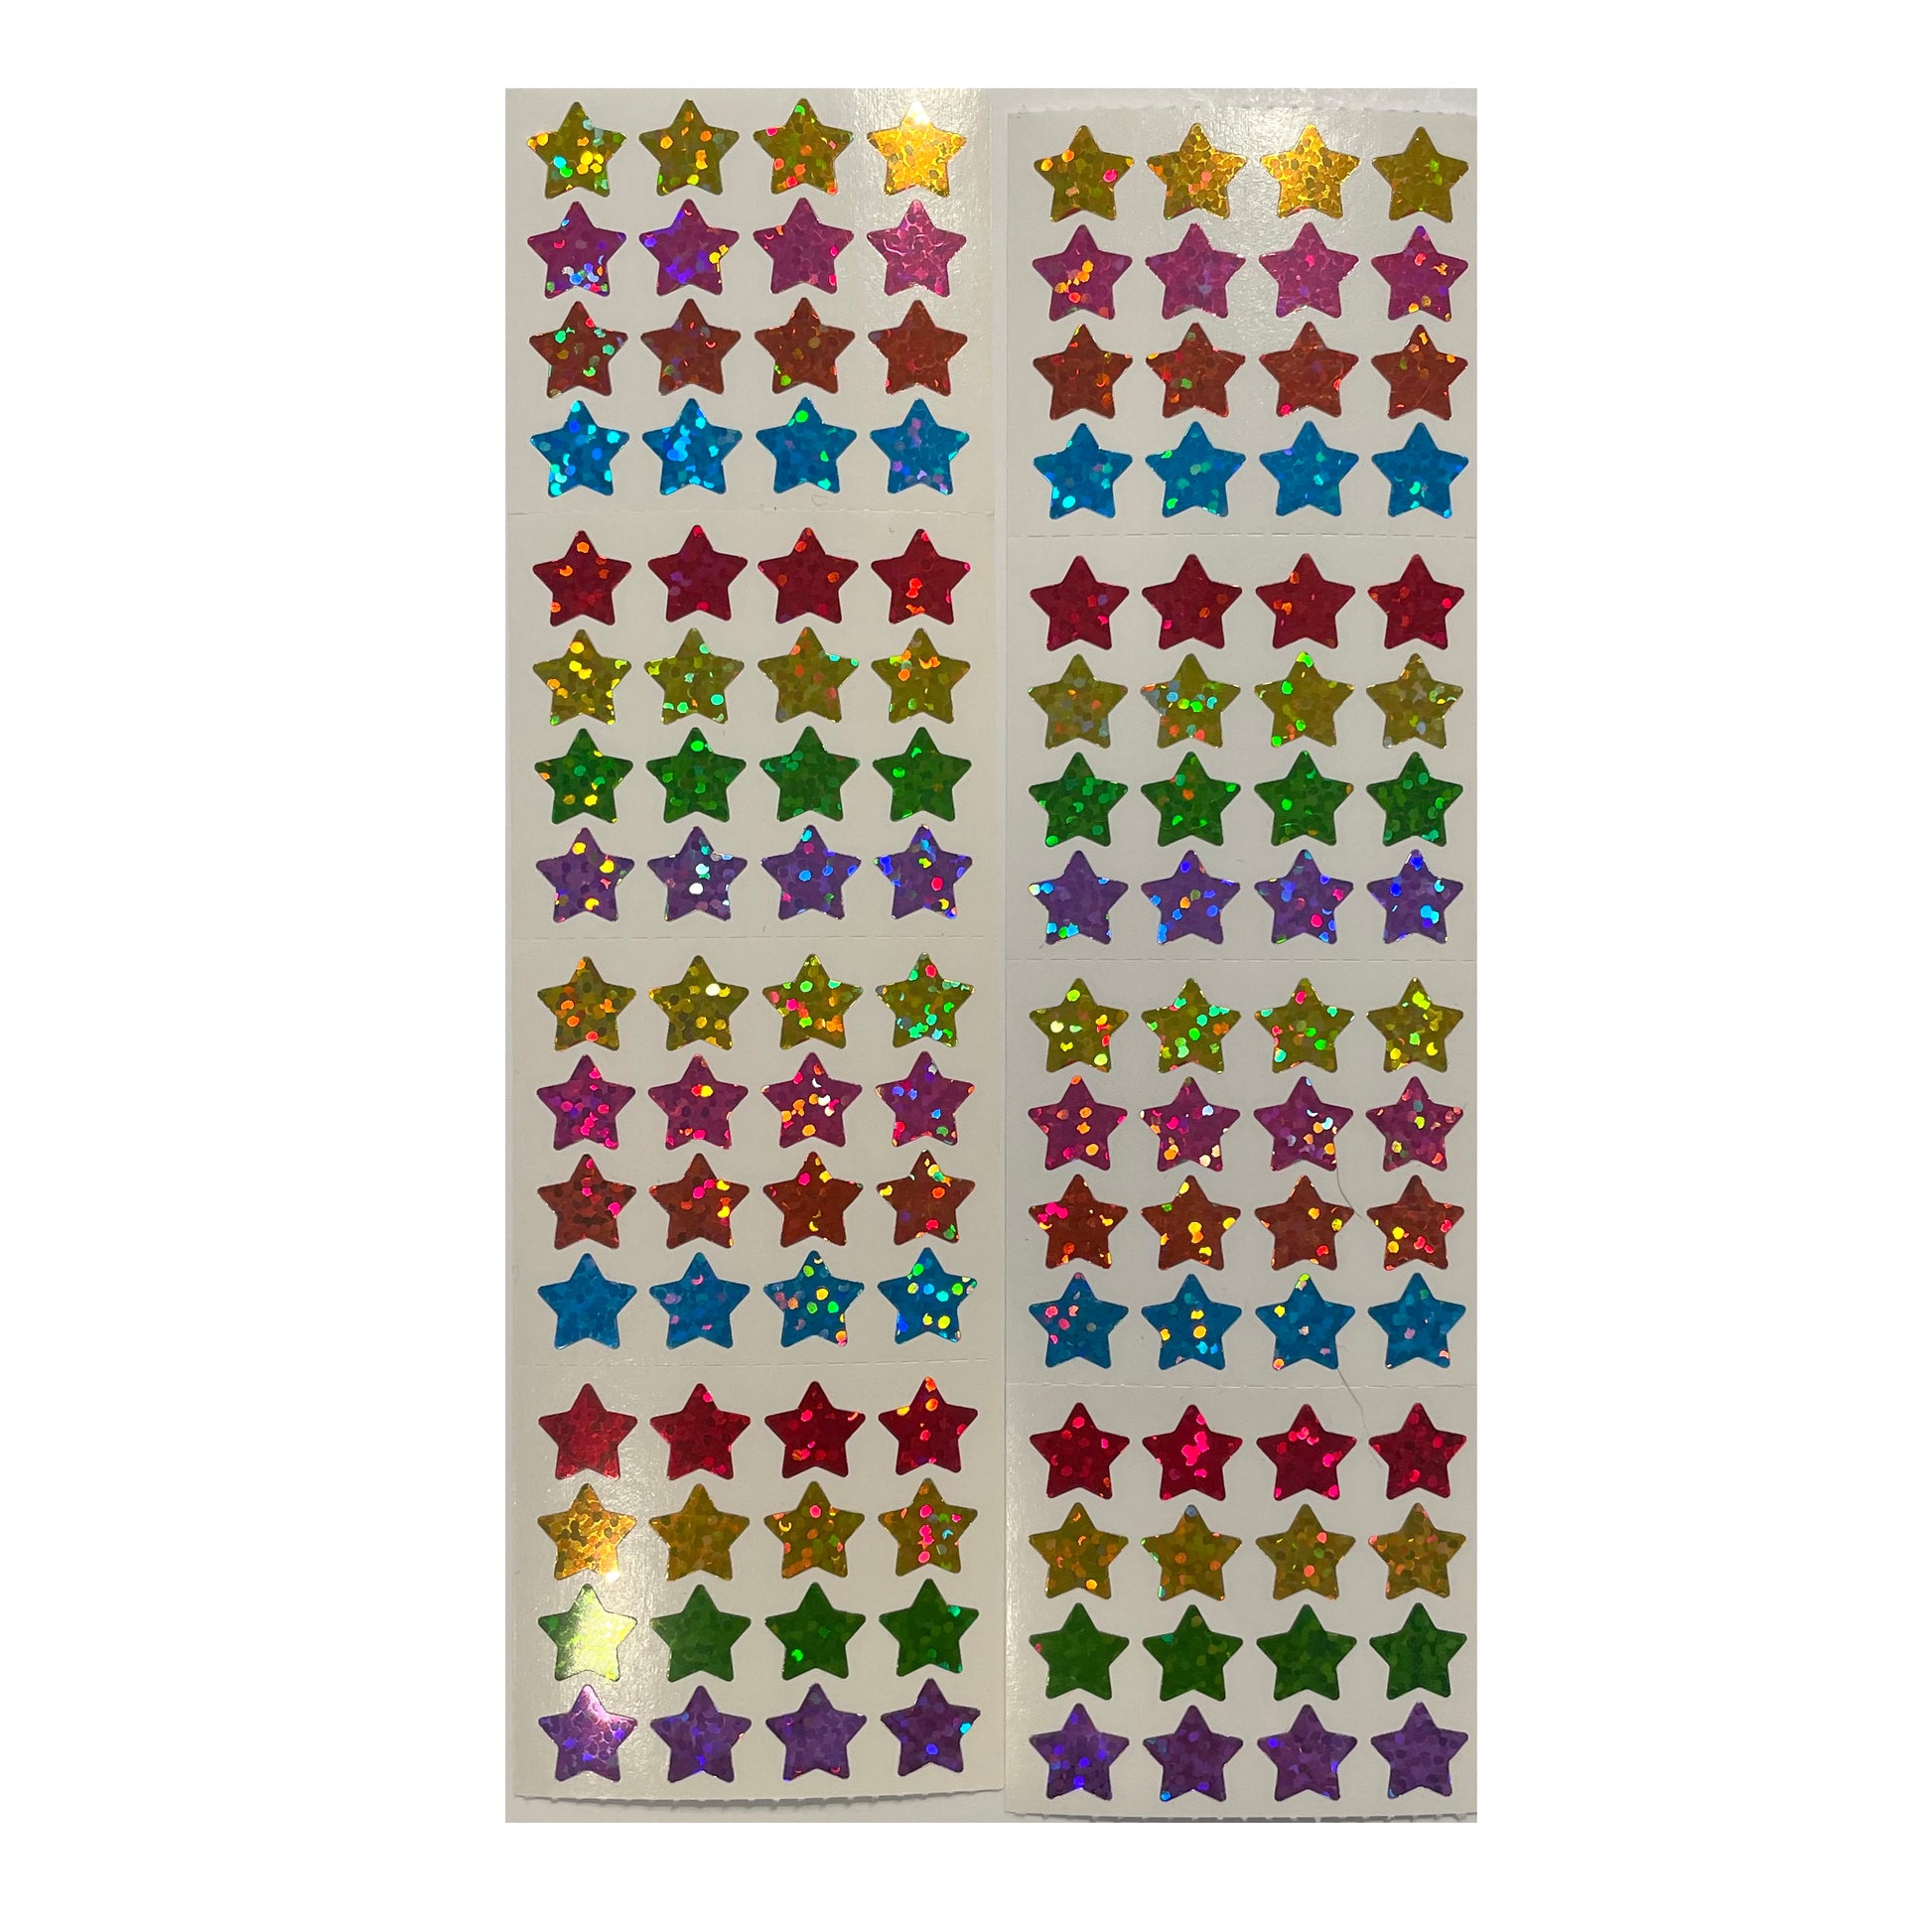 Small Multicolor Stars Sparkly Prismatic Stickers - Packaged